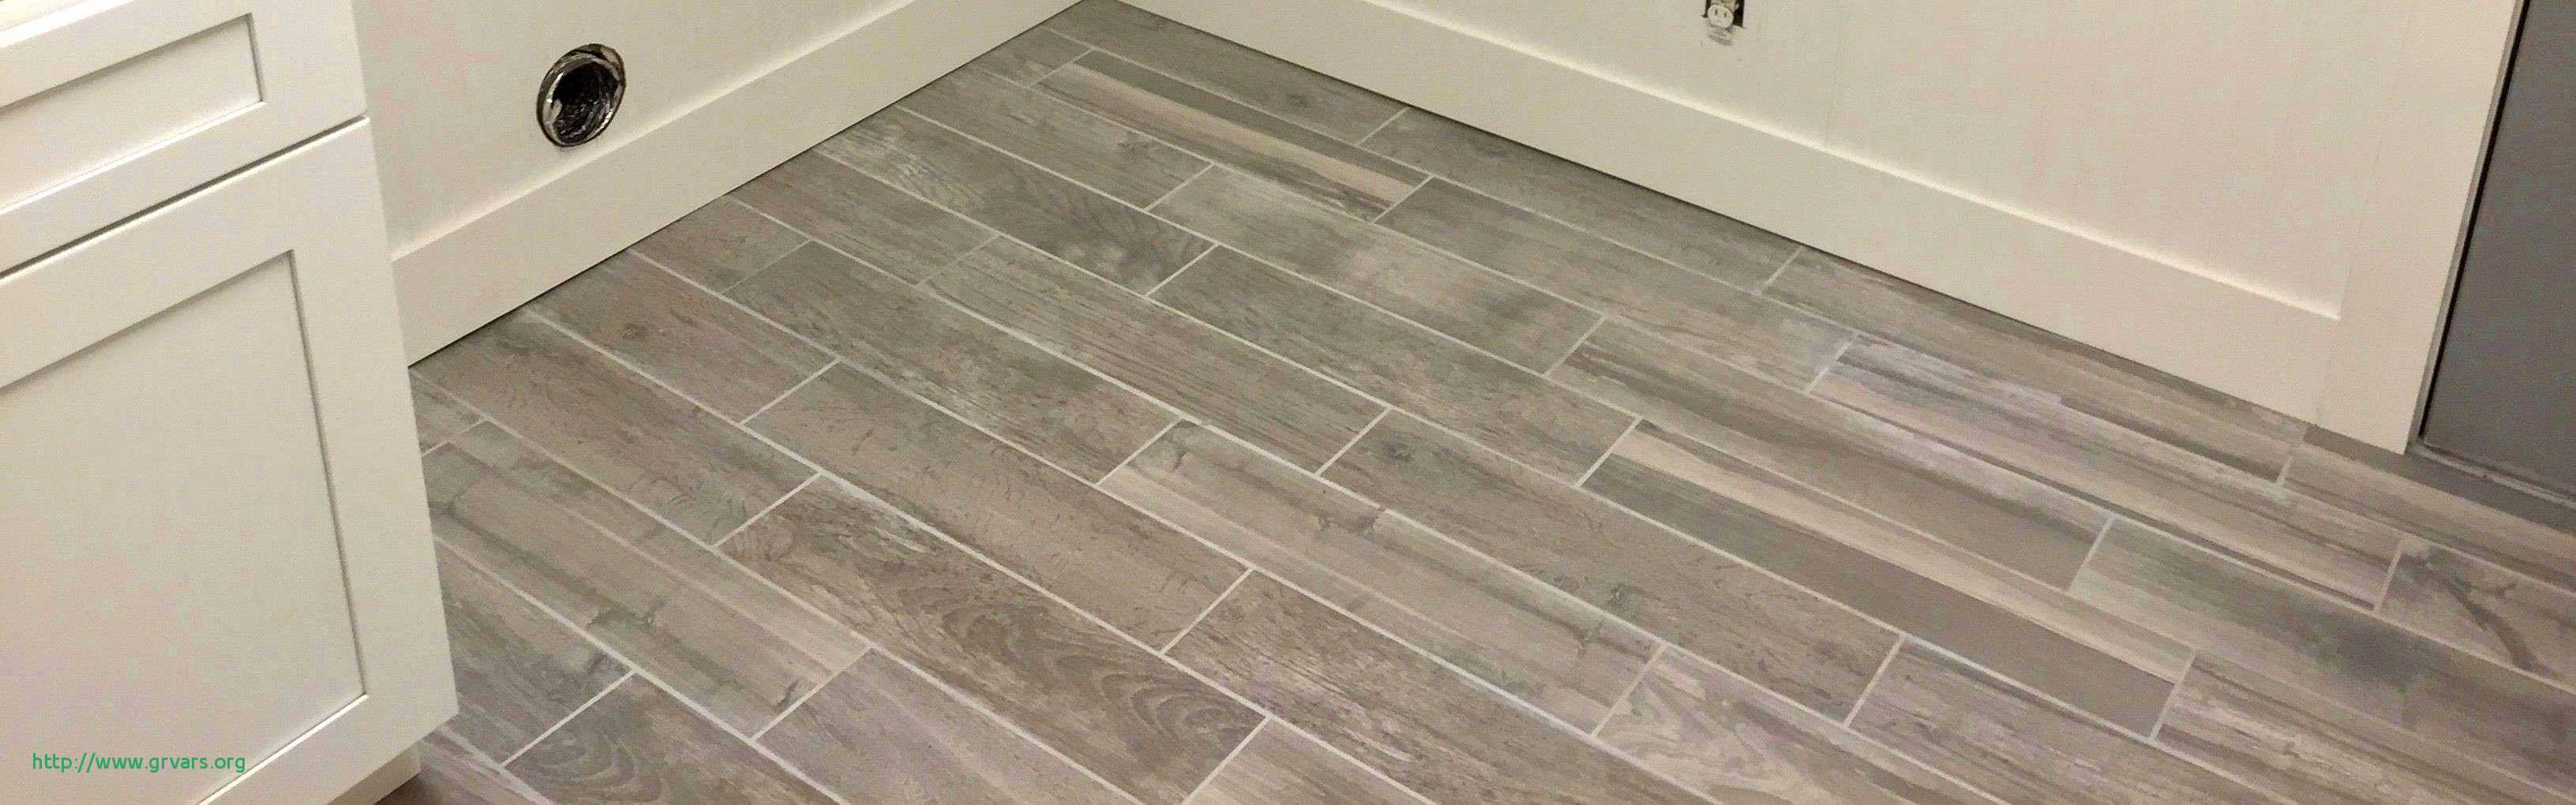 27 Lovely Can You Clean Hardwood Floors with Vinegar 2024 free download can you clean hardwood floors with vinegar of 22 ac289lagant what can i clean hardwood floors with ideas blog throughout unique bathroom tiling ideas best h sink install bathroom i 0d exciti